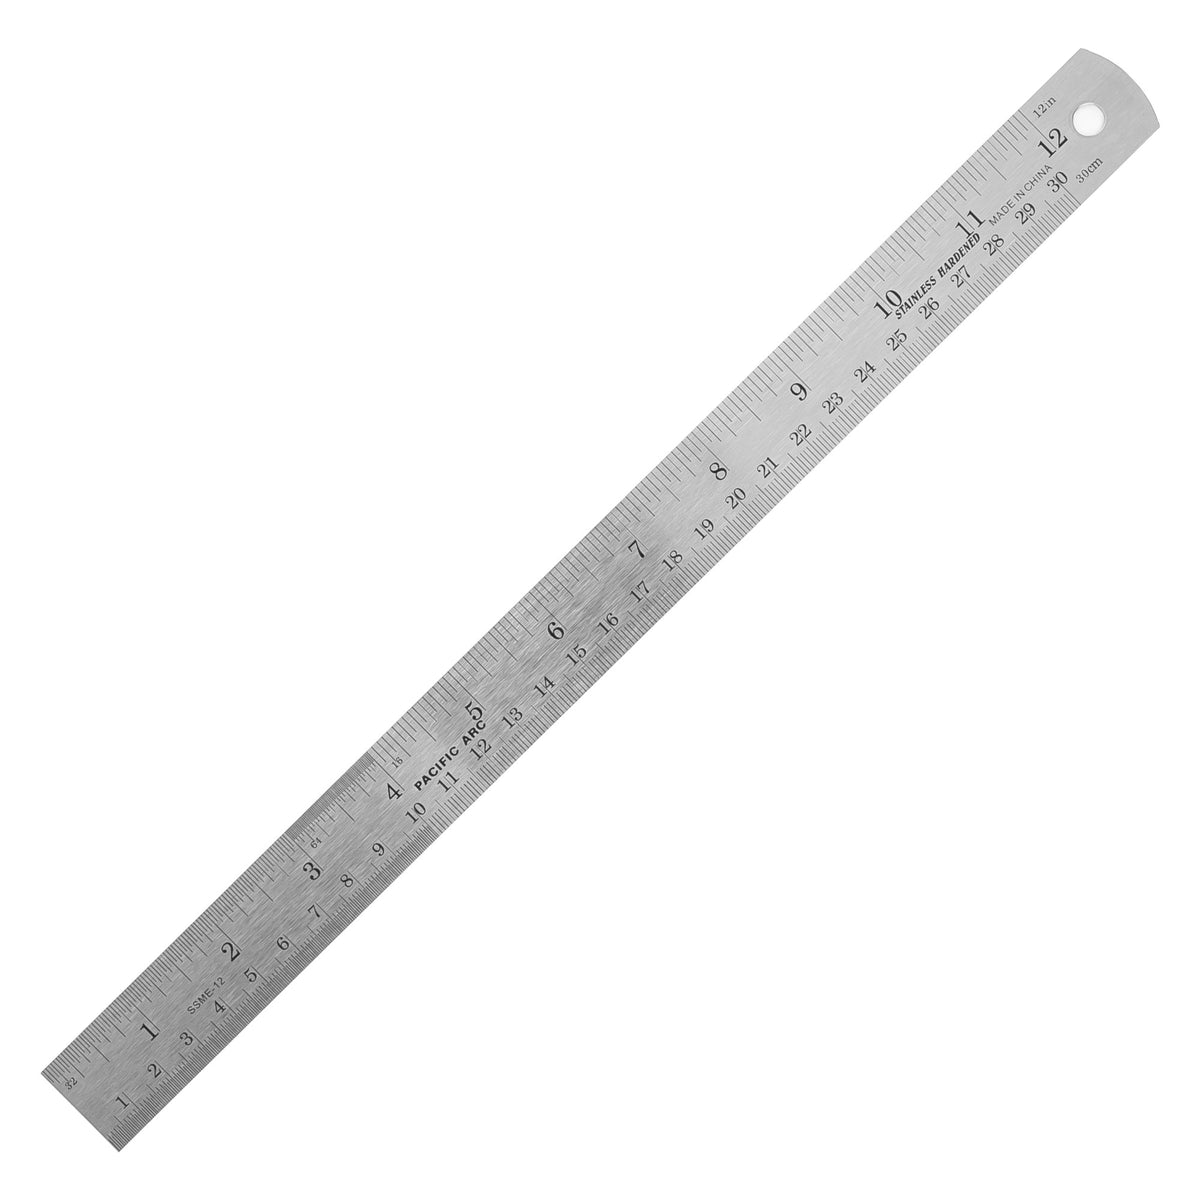 Pacific Arc Stainless Steel Ruler with Inch and Metric(mm), Non